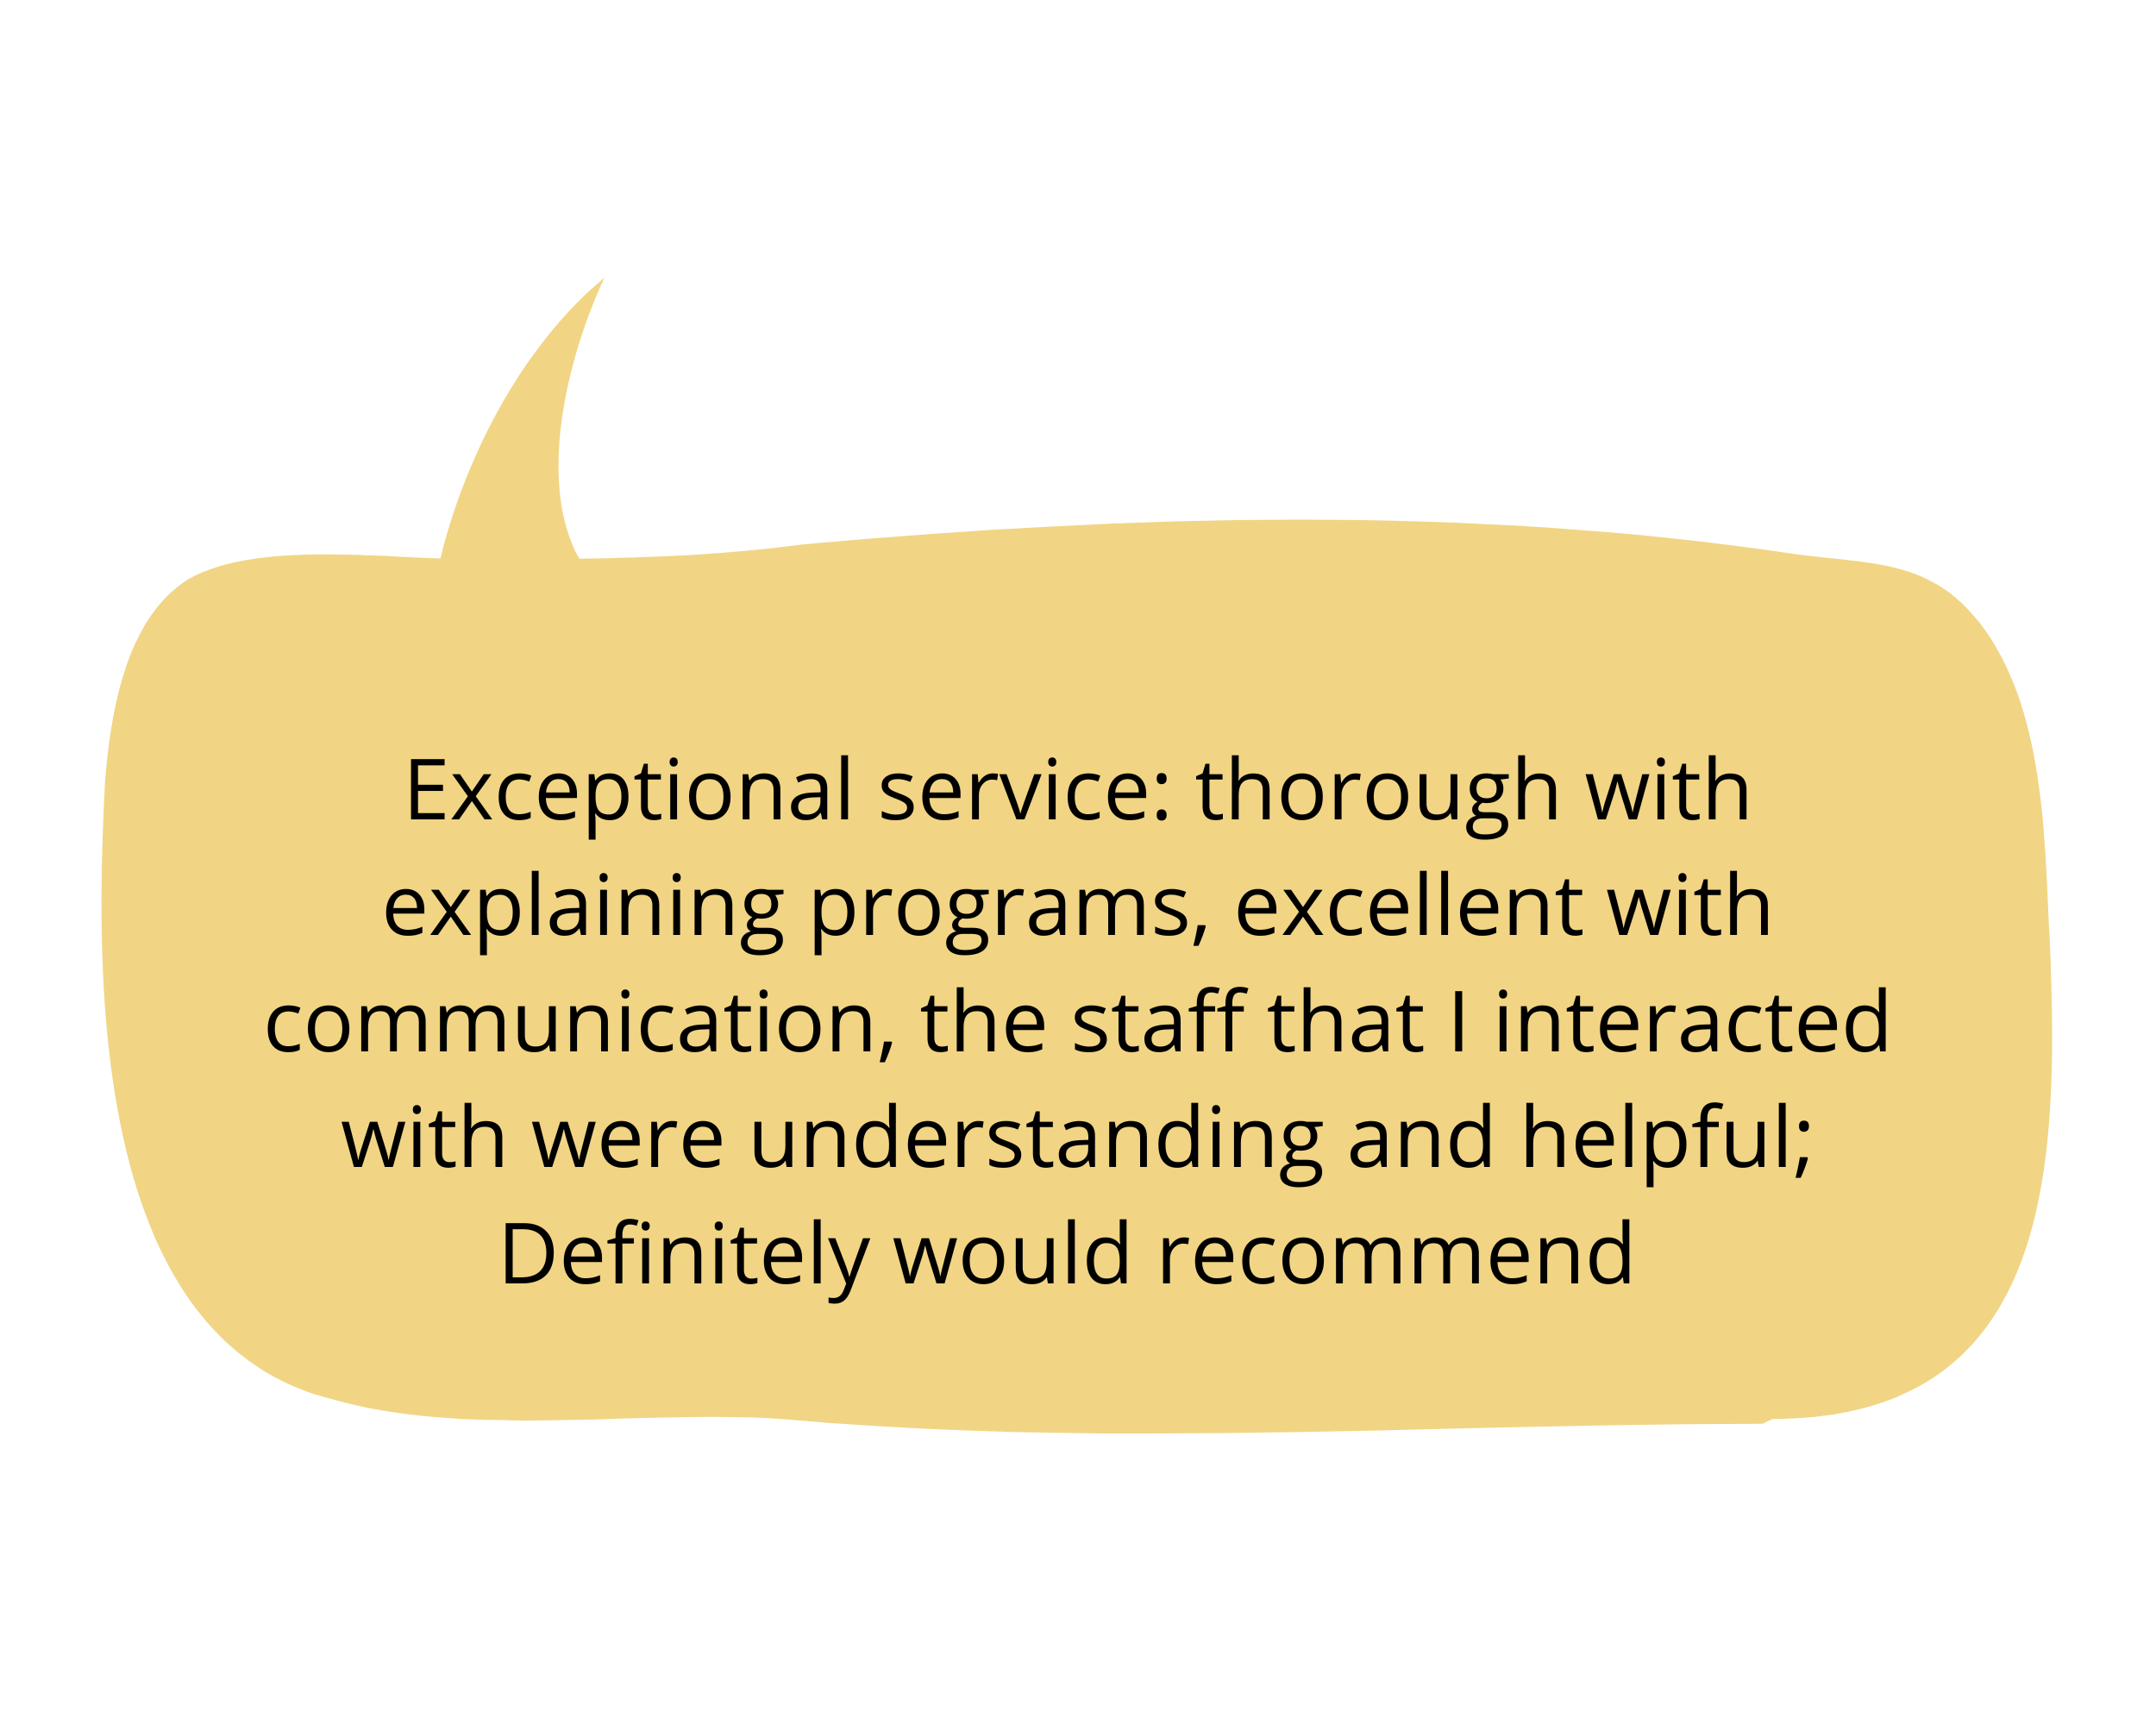    Exceptional service: thorough with explaining programs, excellent with communication, the staff that I interacted with were understanding and helpful; Definitely would recommend   